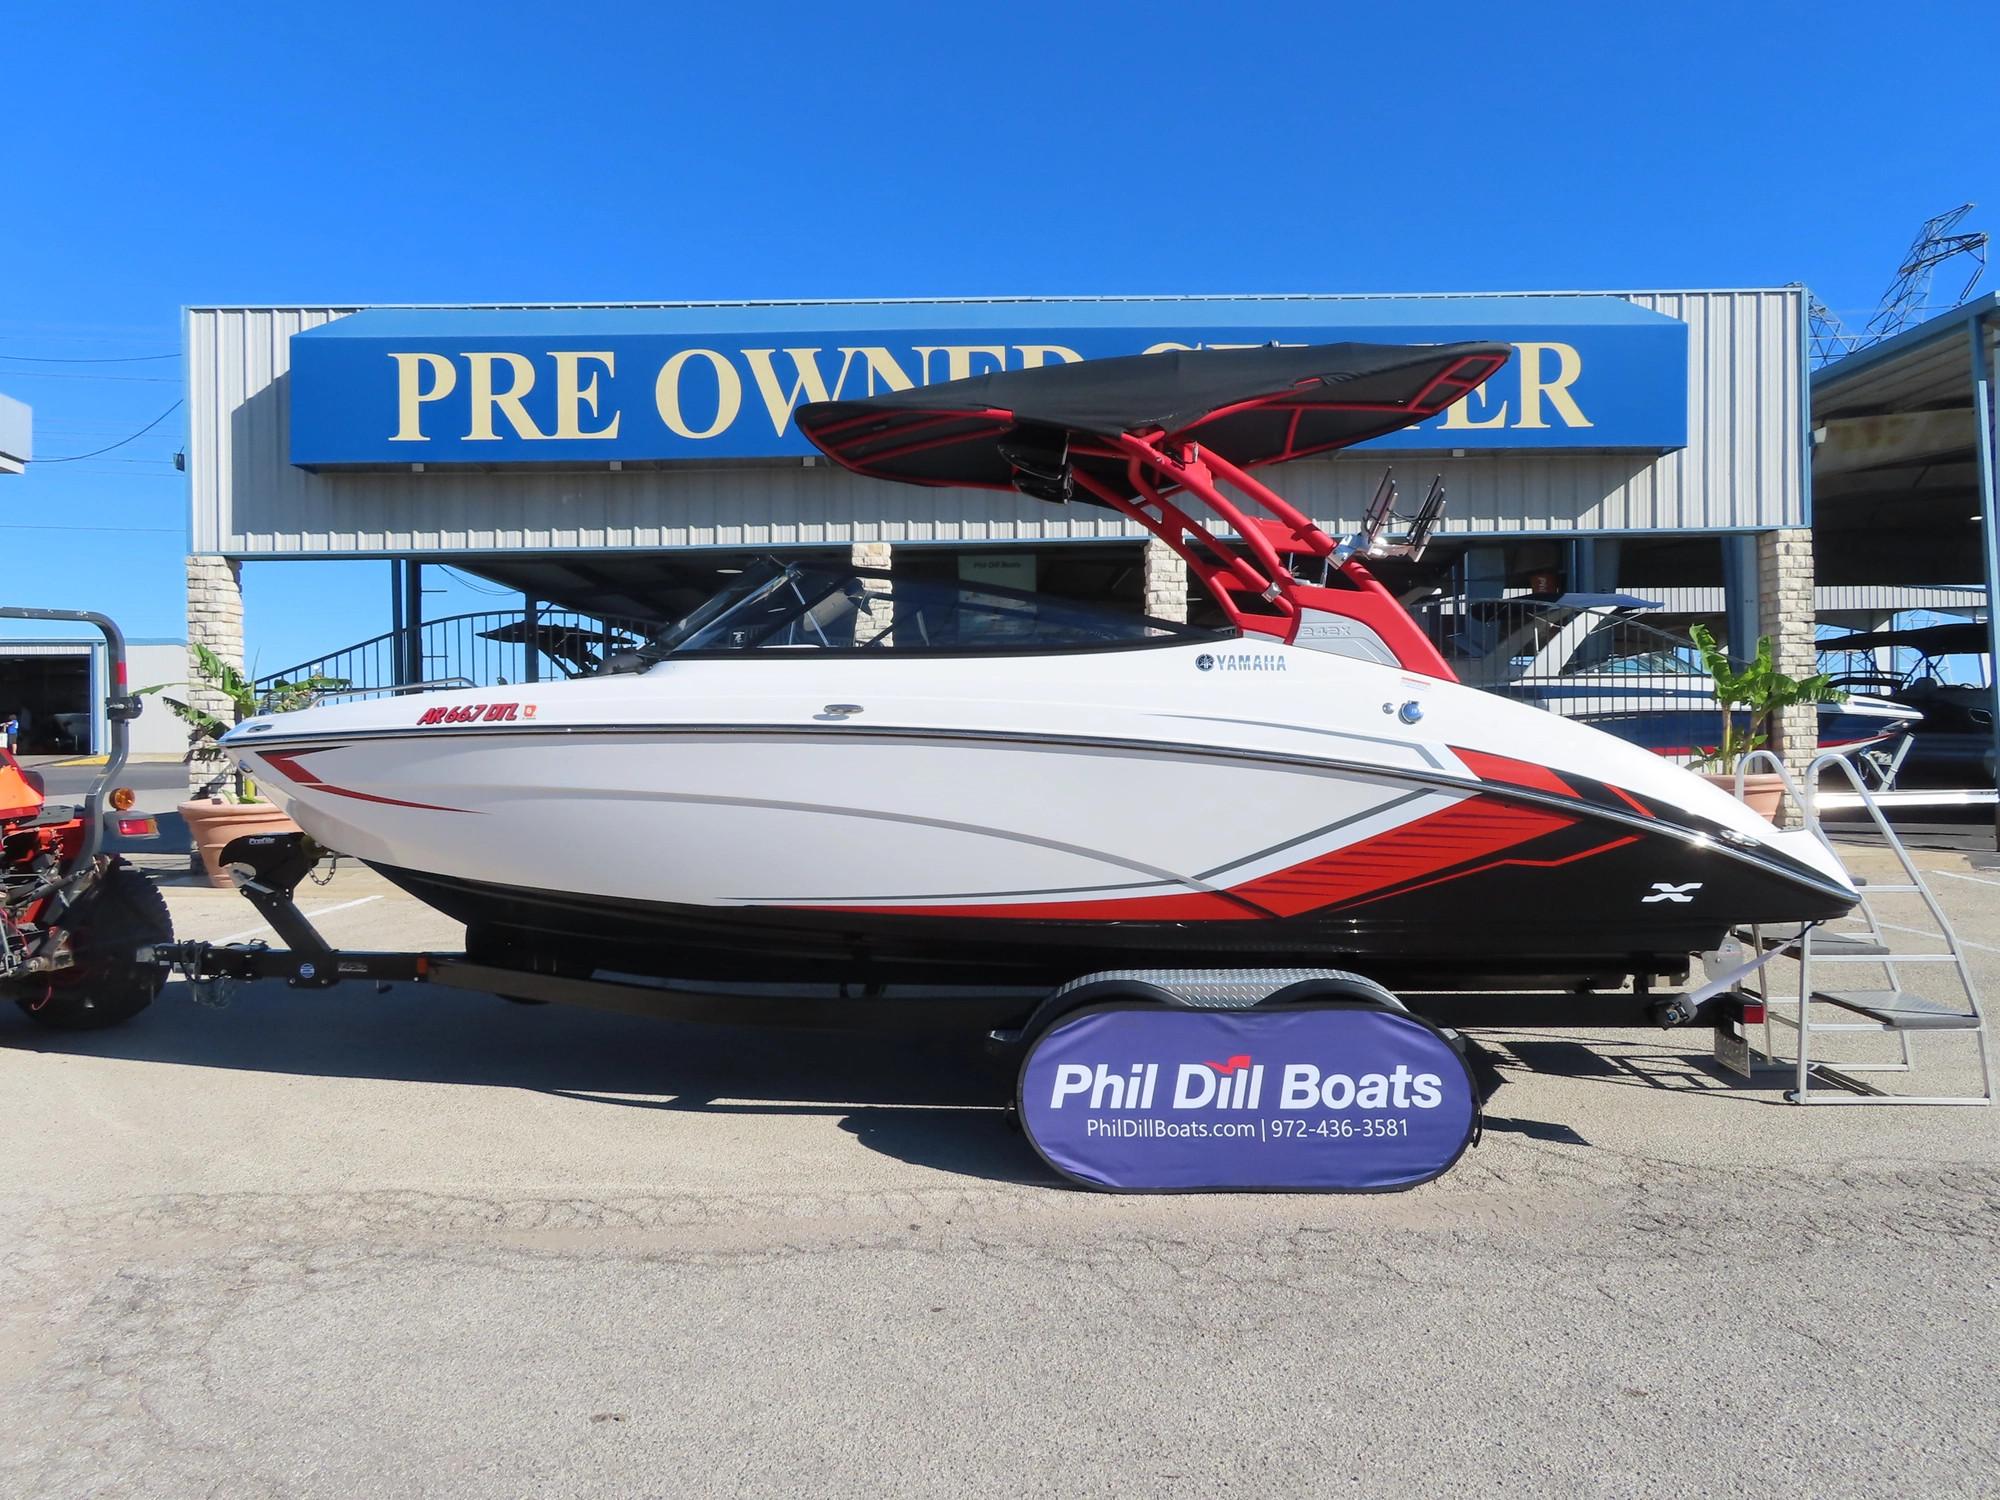 Pre-Owned, Fishing Boats in Killeen, TX, Fishing Boats